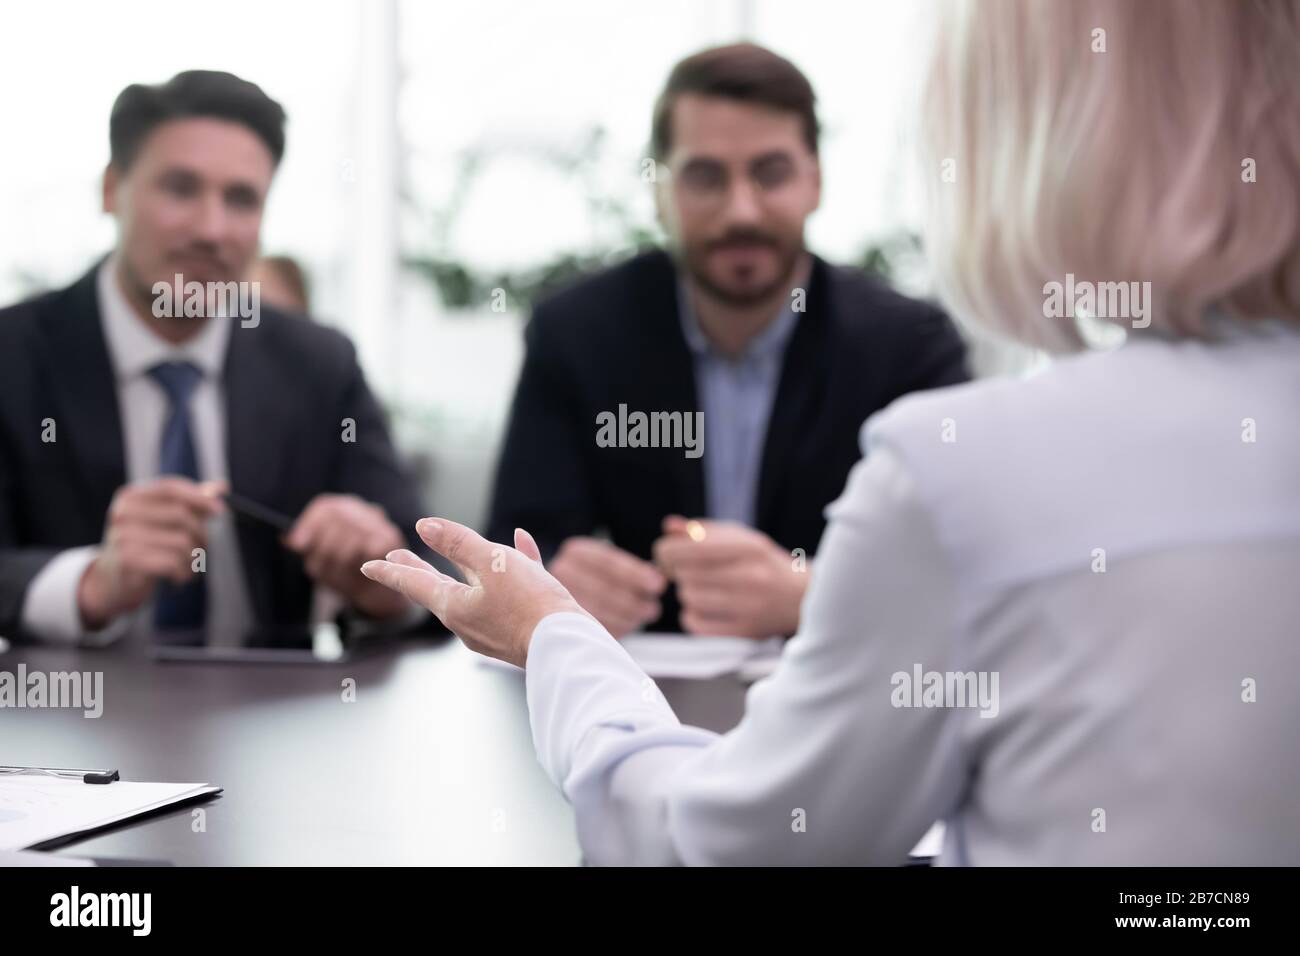 Female job candidate have interview with male employers Stock Photo